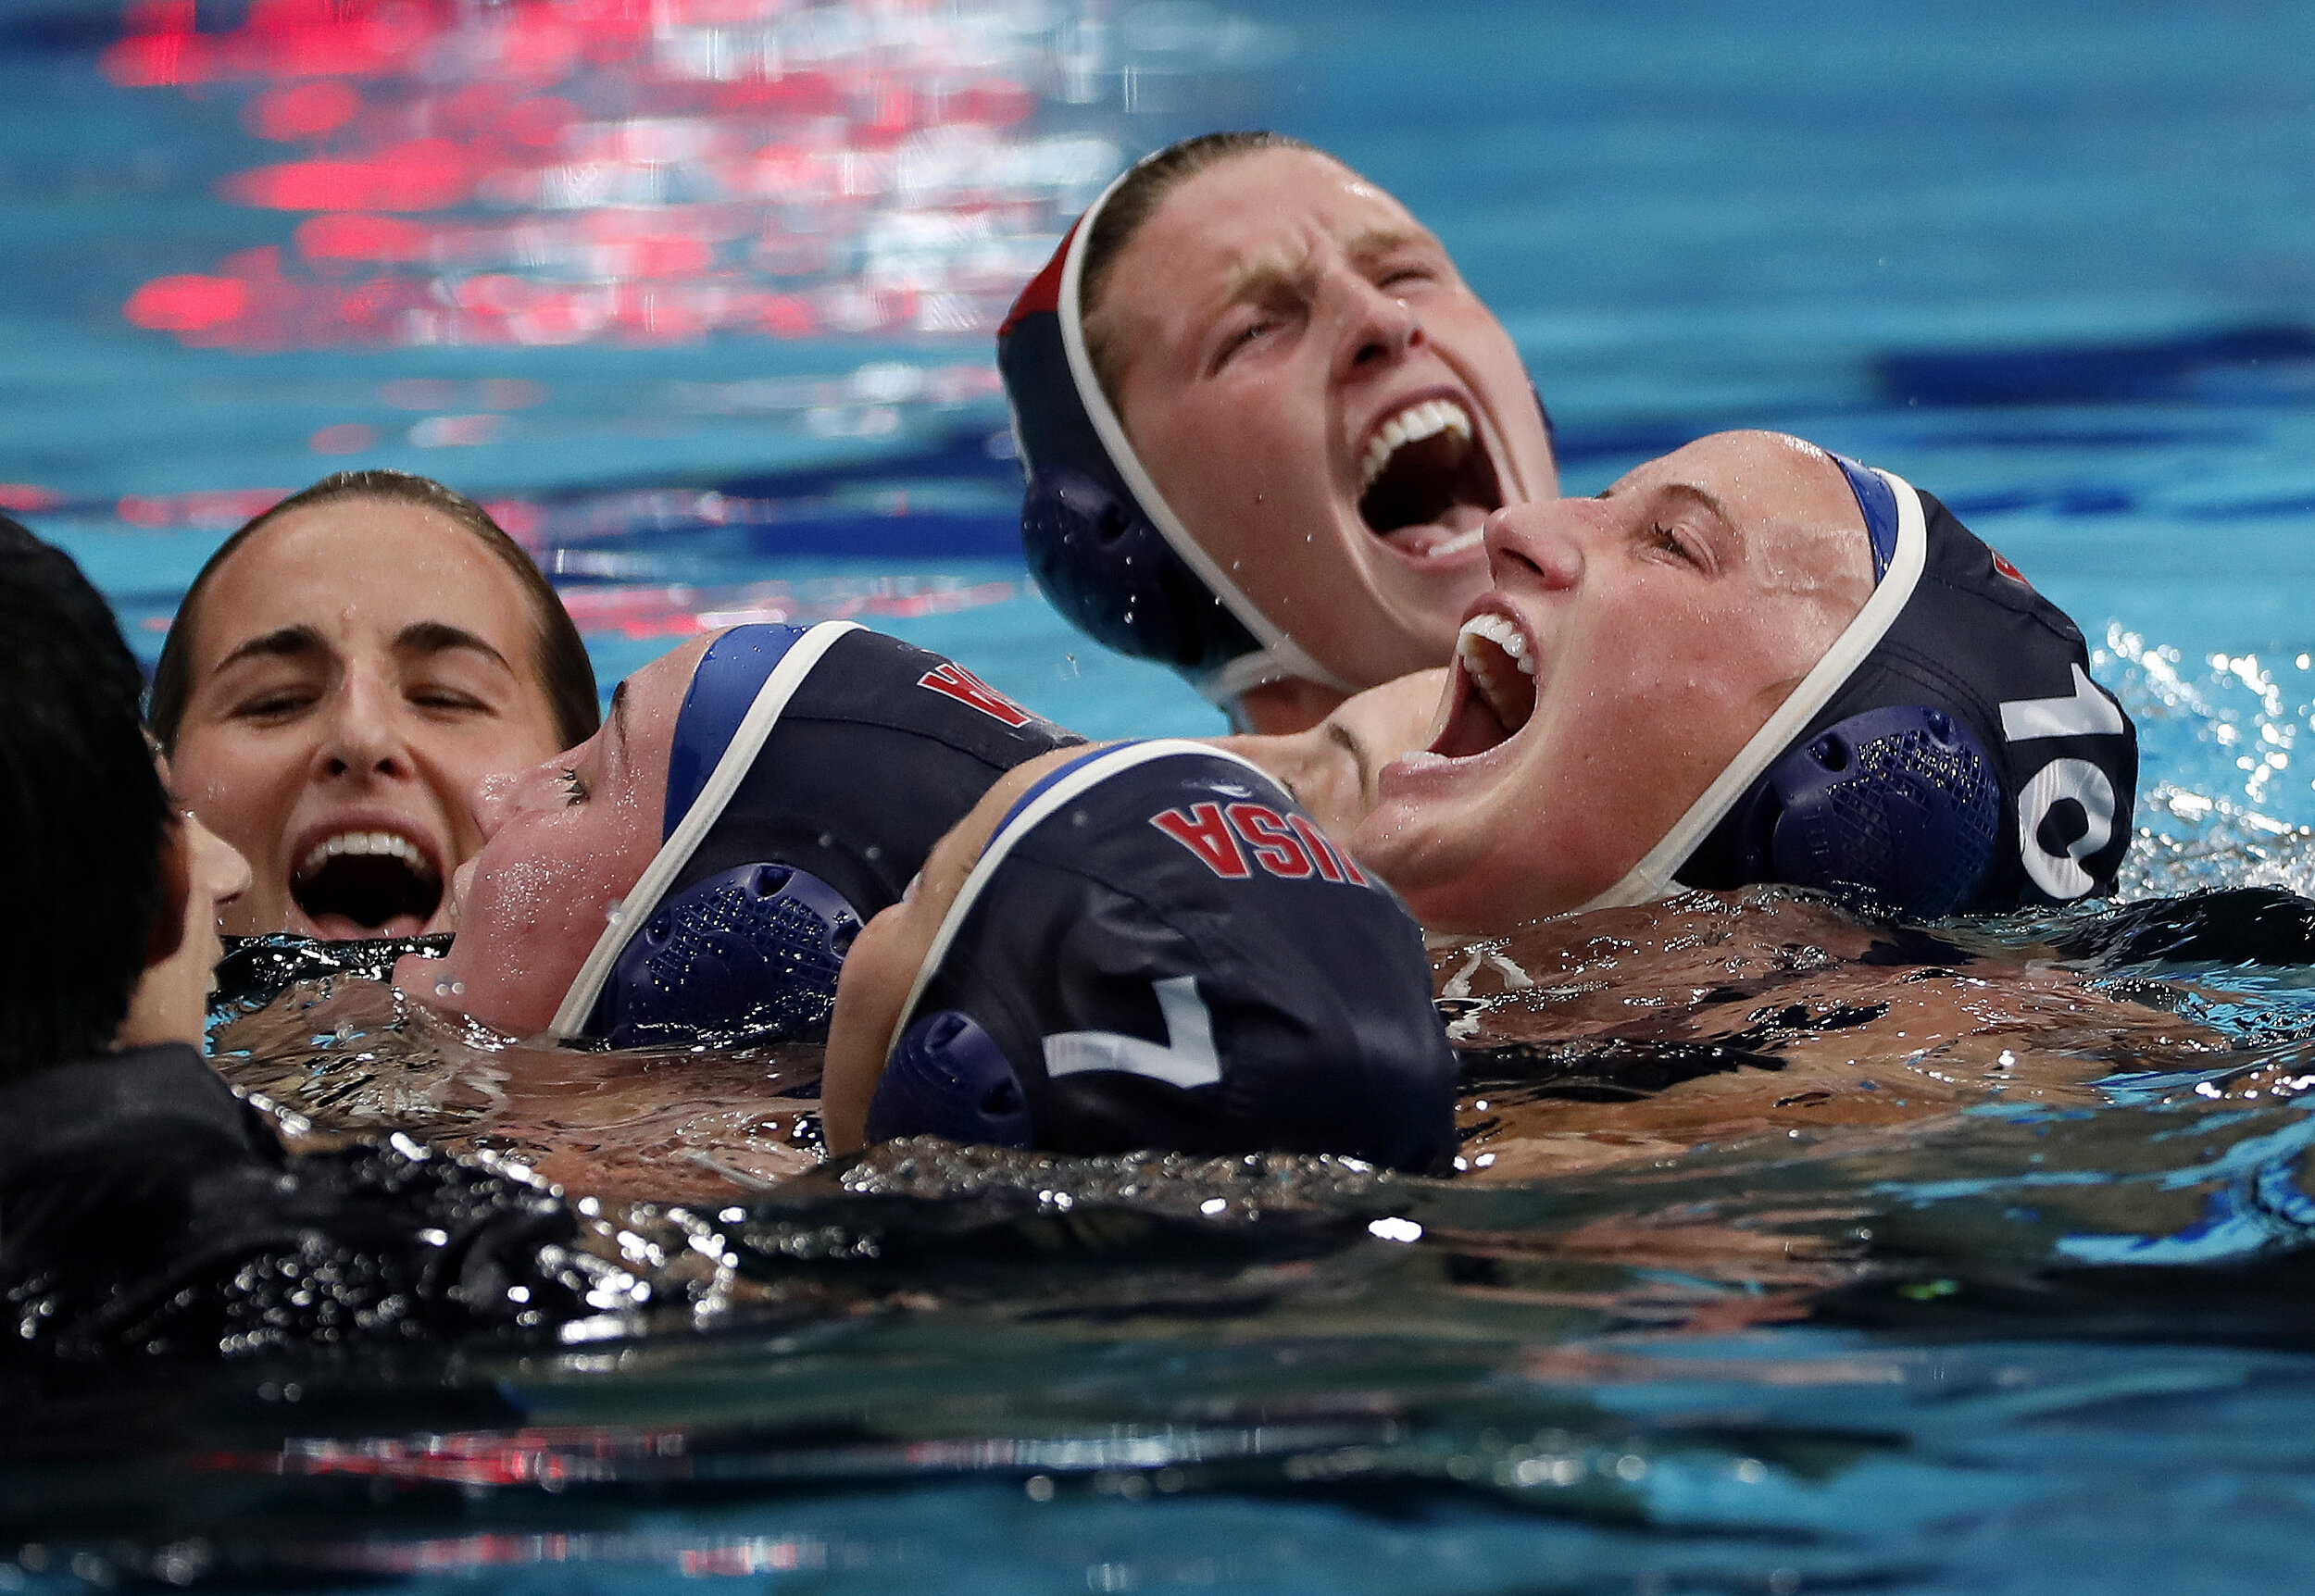  U.S. water Polo player Kaleigh Gilchrist on right celebrates with teammates after beating Spain for a gold medal at the Tokyo Olympics. 